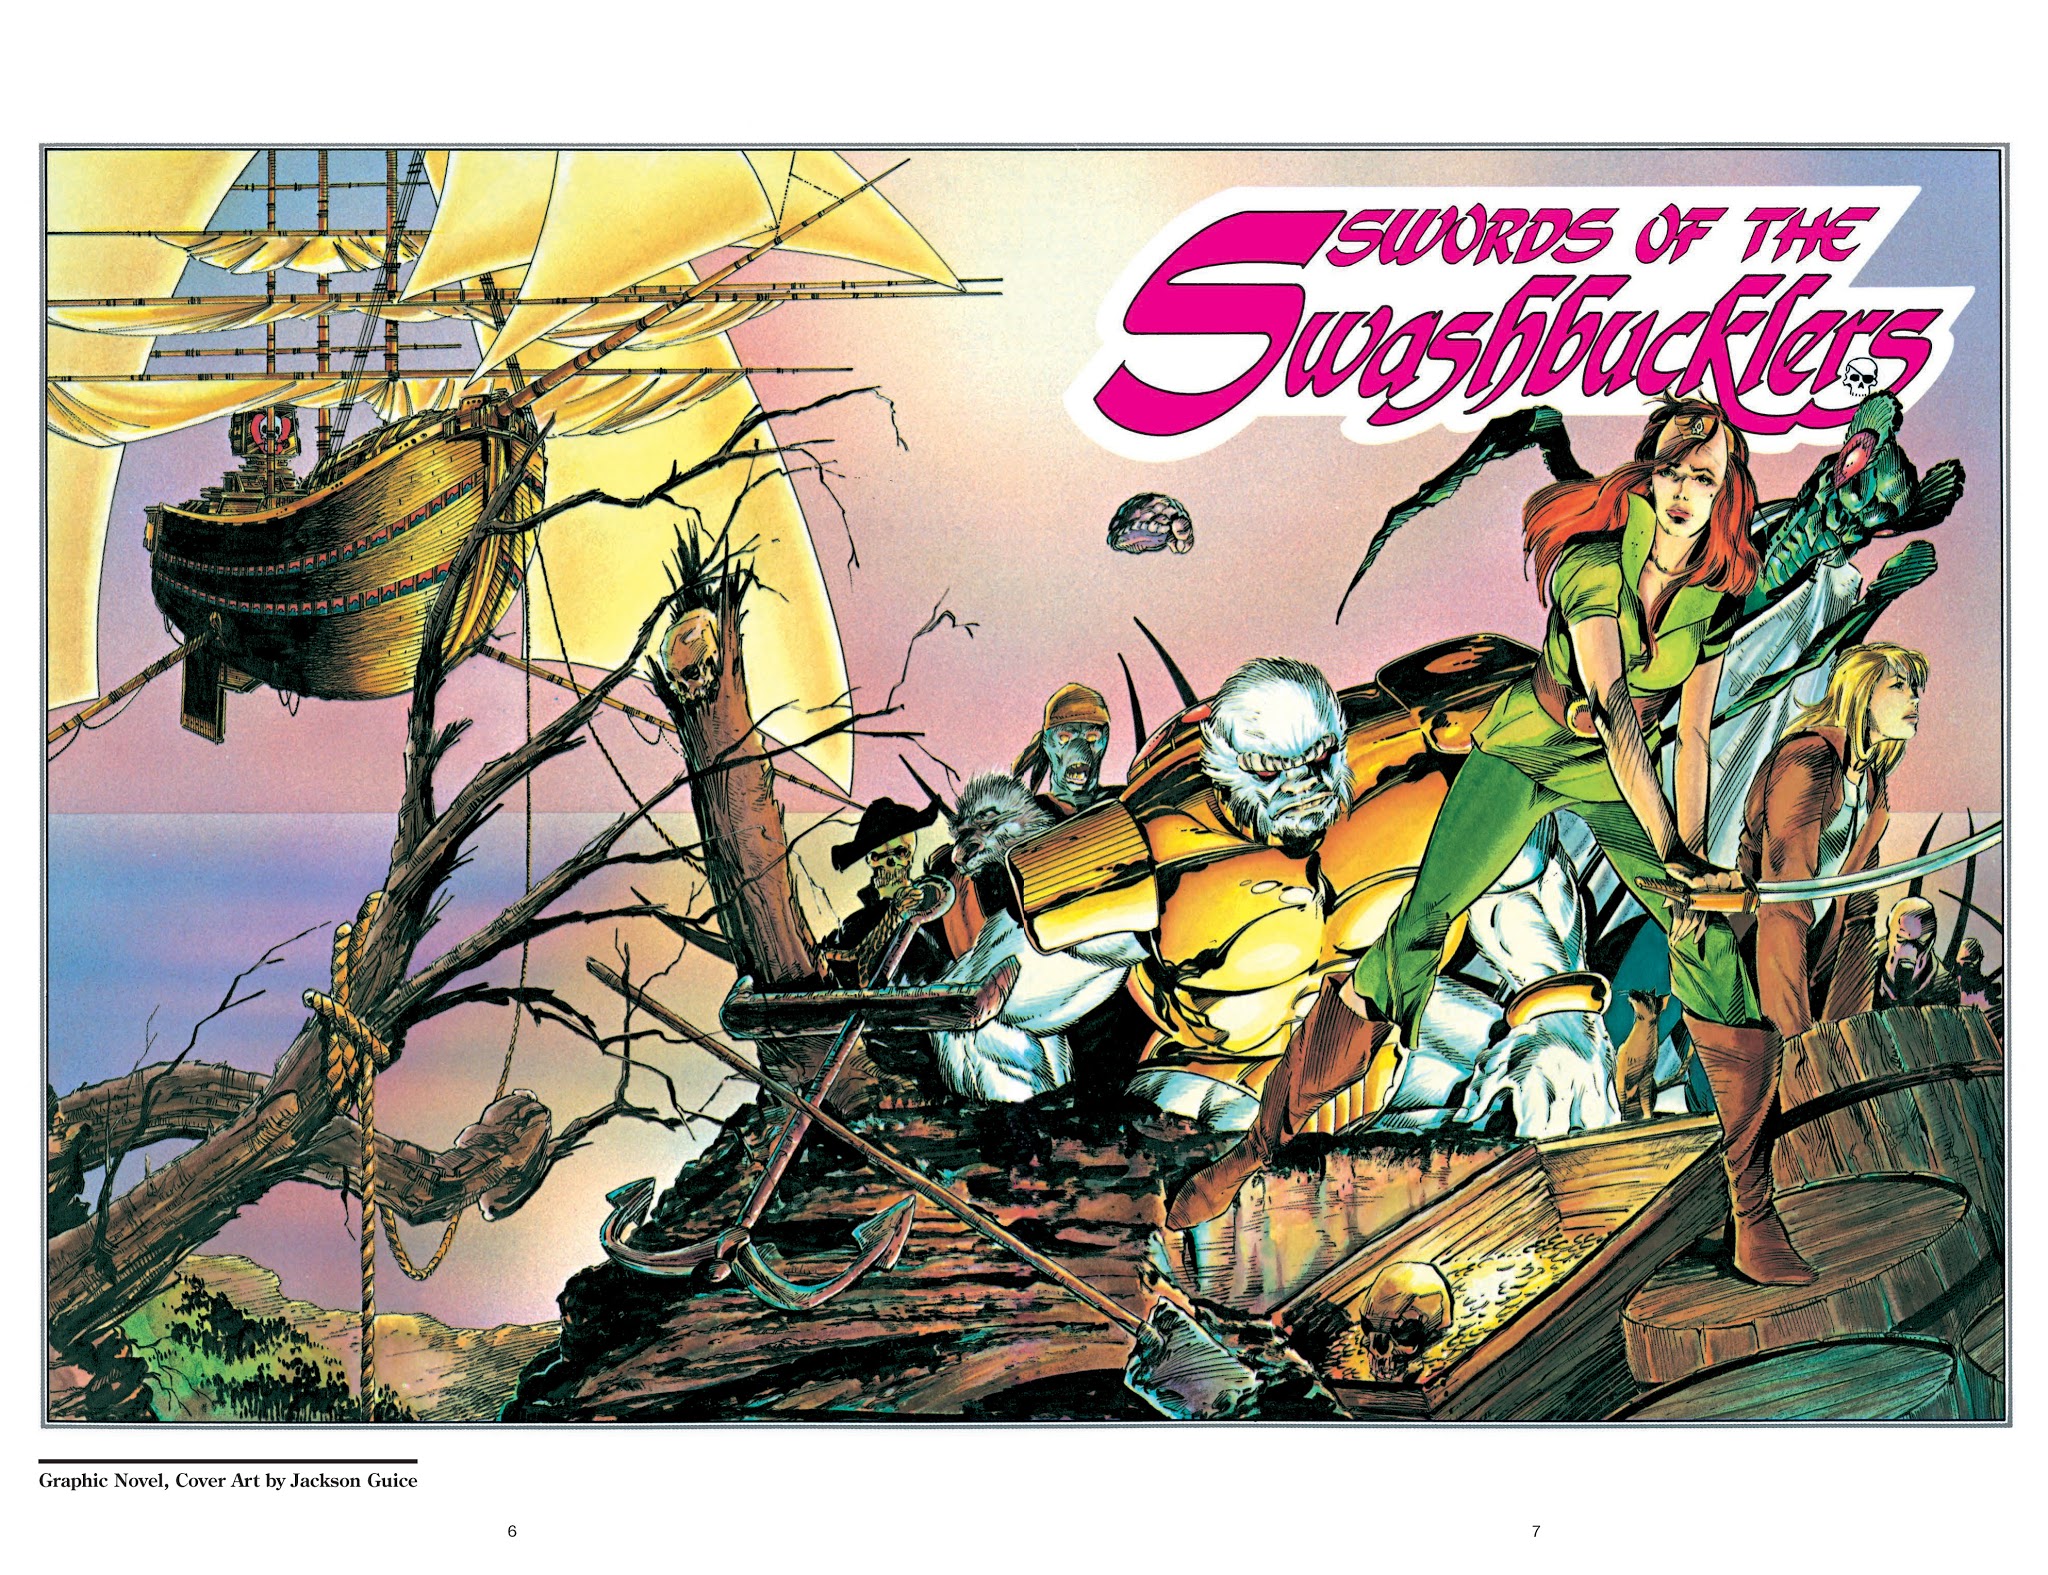 Read online Swords of the Swashbucklers comic -  Issue # TPB - 7